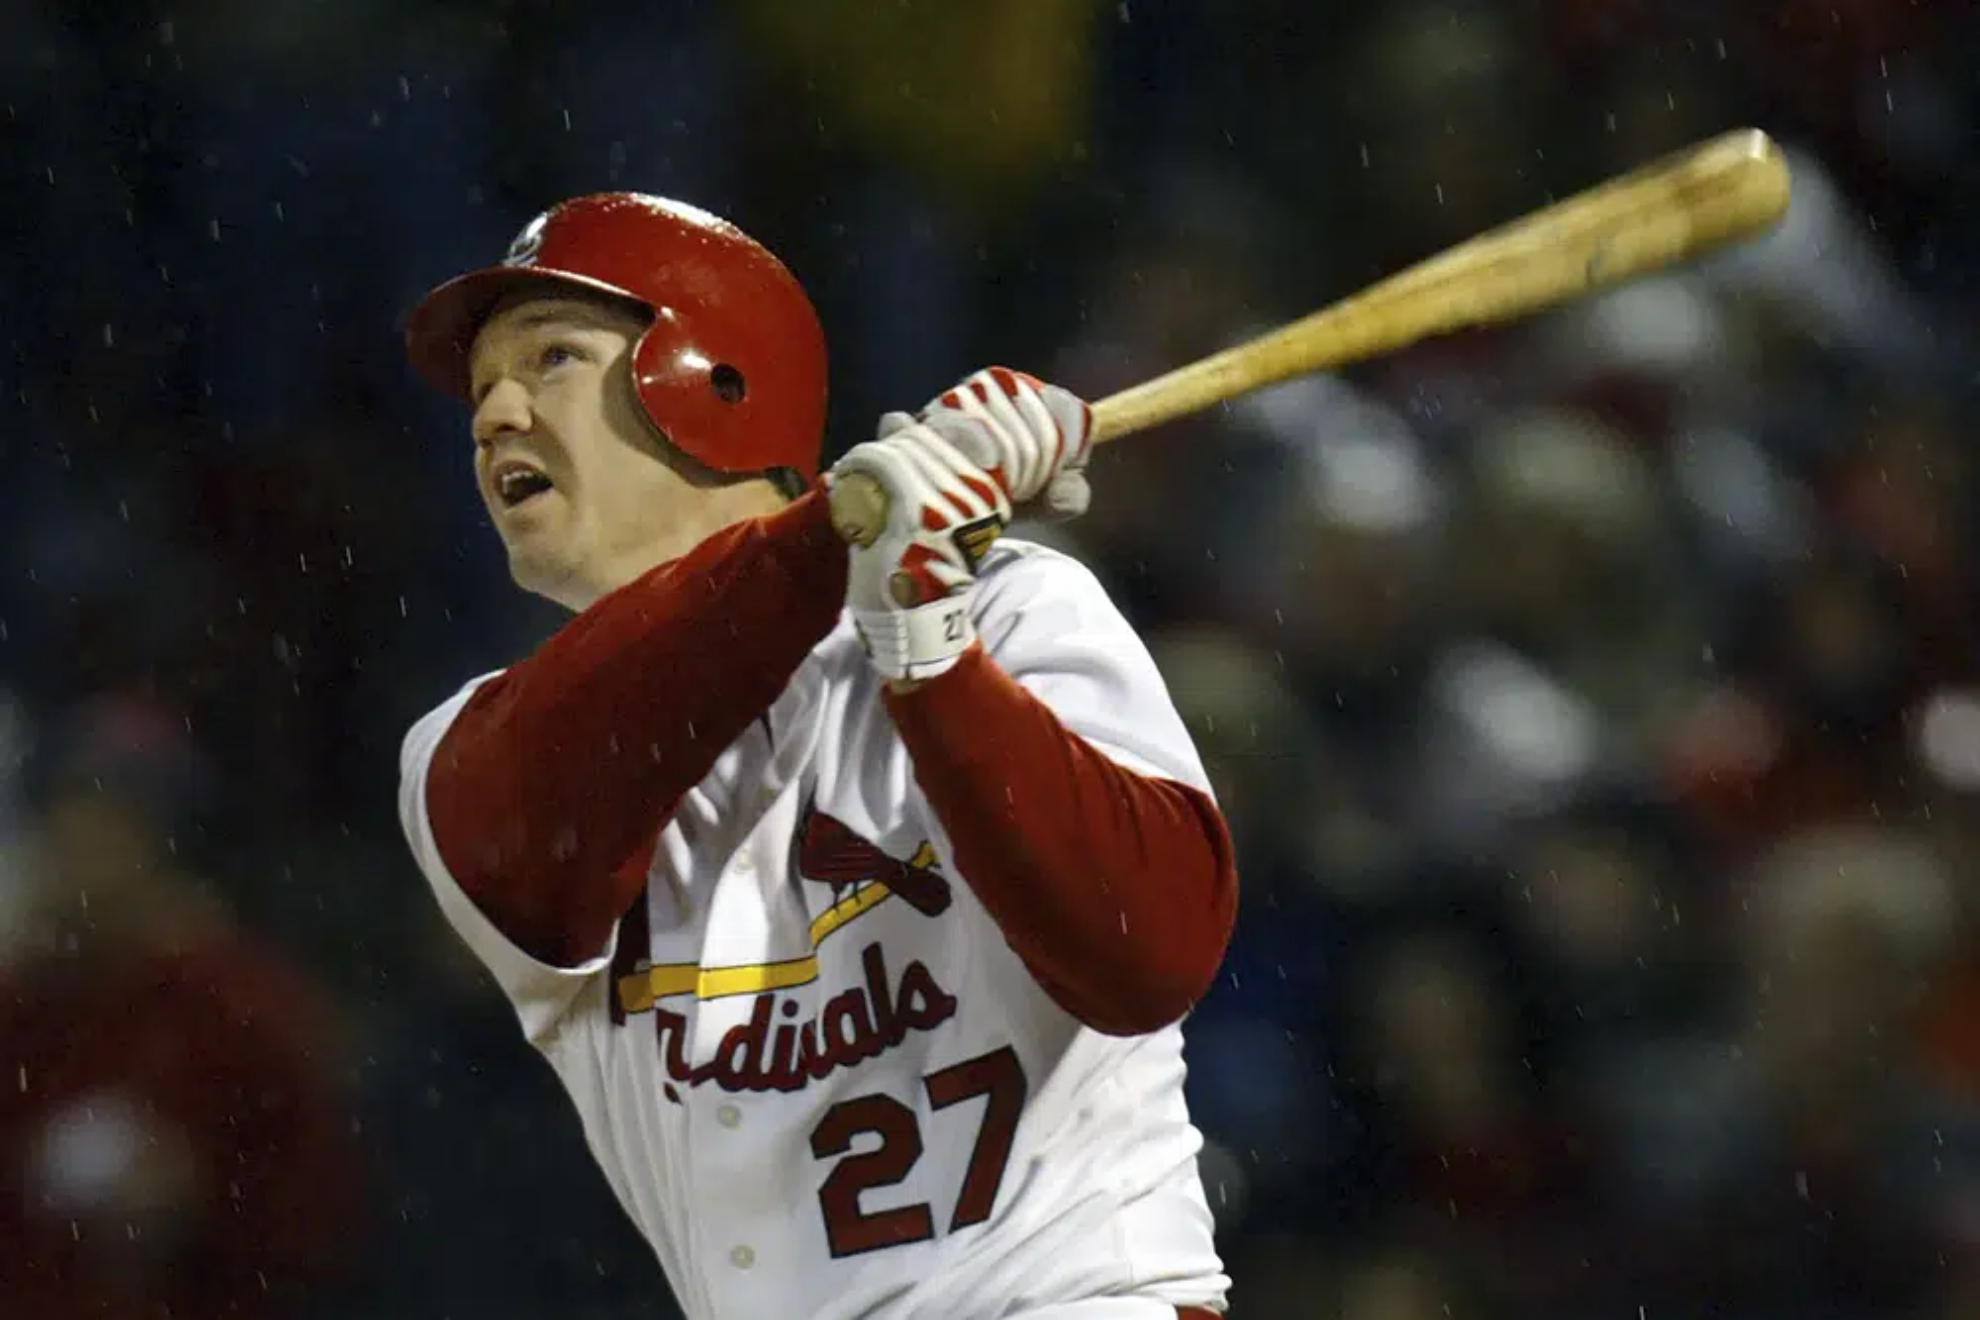 Scott Rolen will be inducted to baseball's Hall of Fame